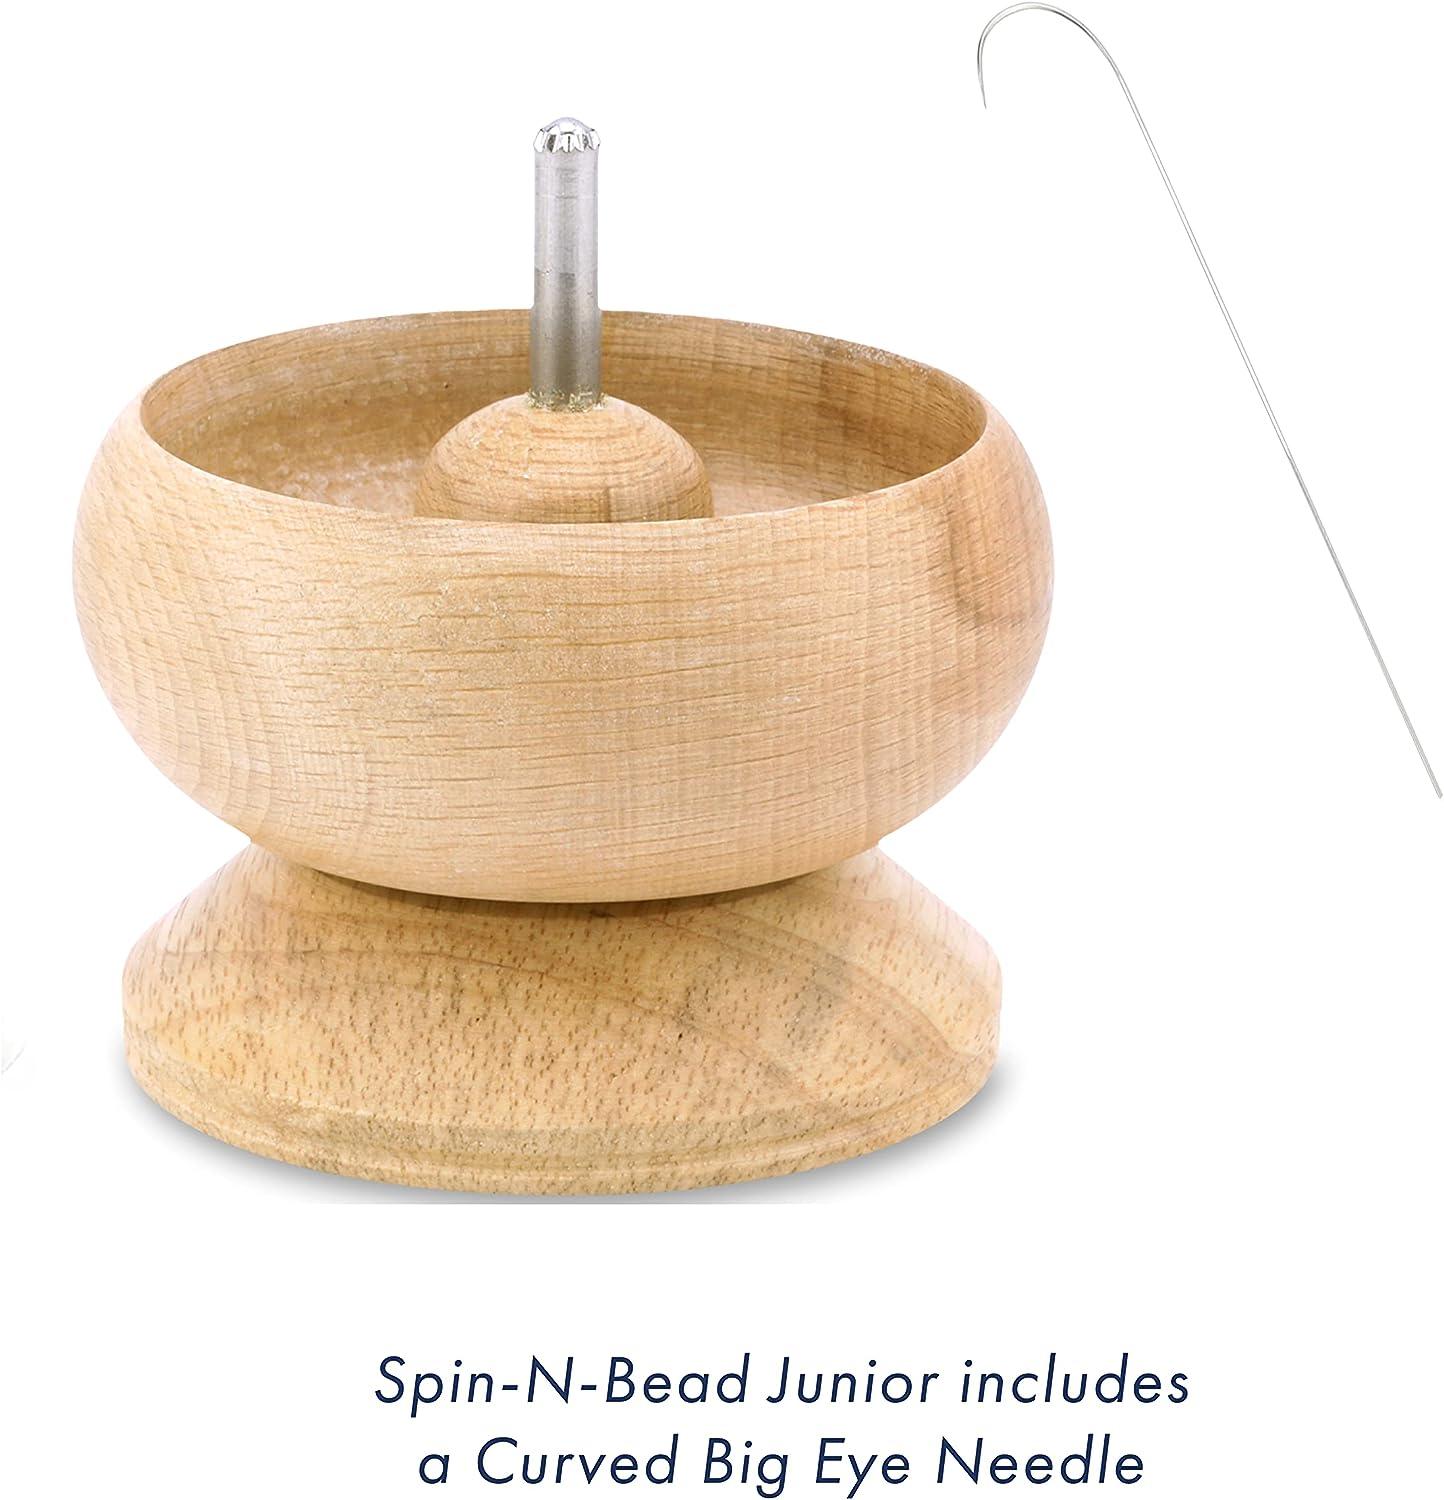 Beadalon Spin-N-Bead, Mini Size Bead Spinner Bowl Includes 1 Curved Big Eye  Needle for Easy Bead Stringing and Jewelry Making, Natural